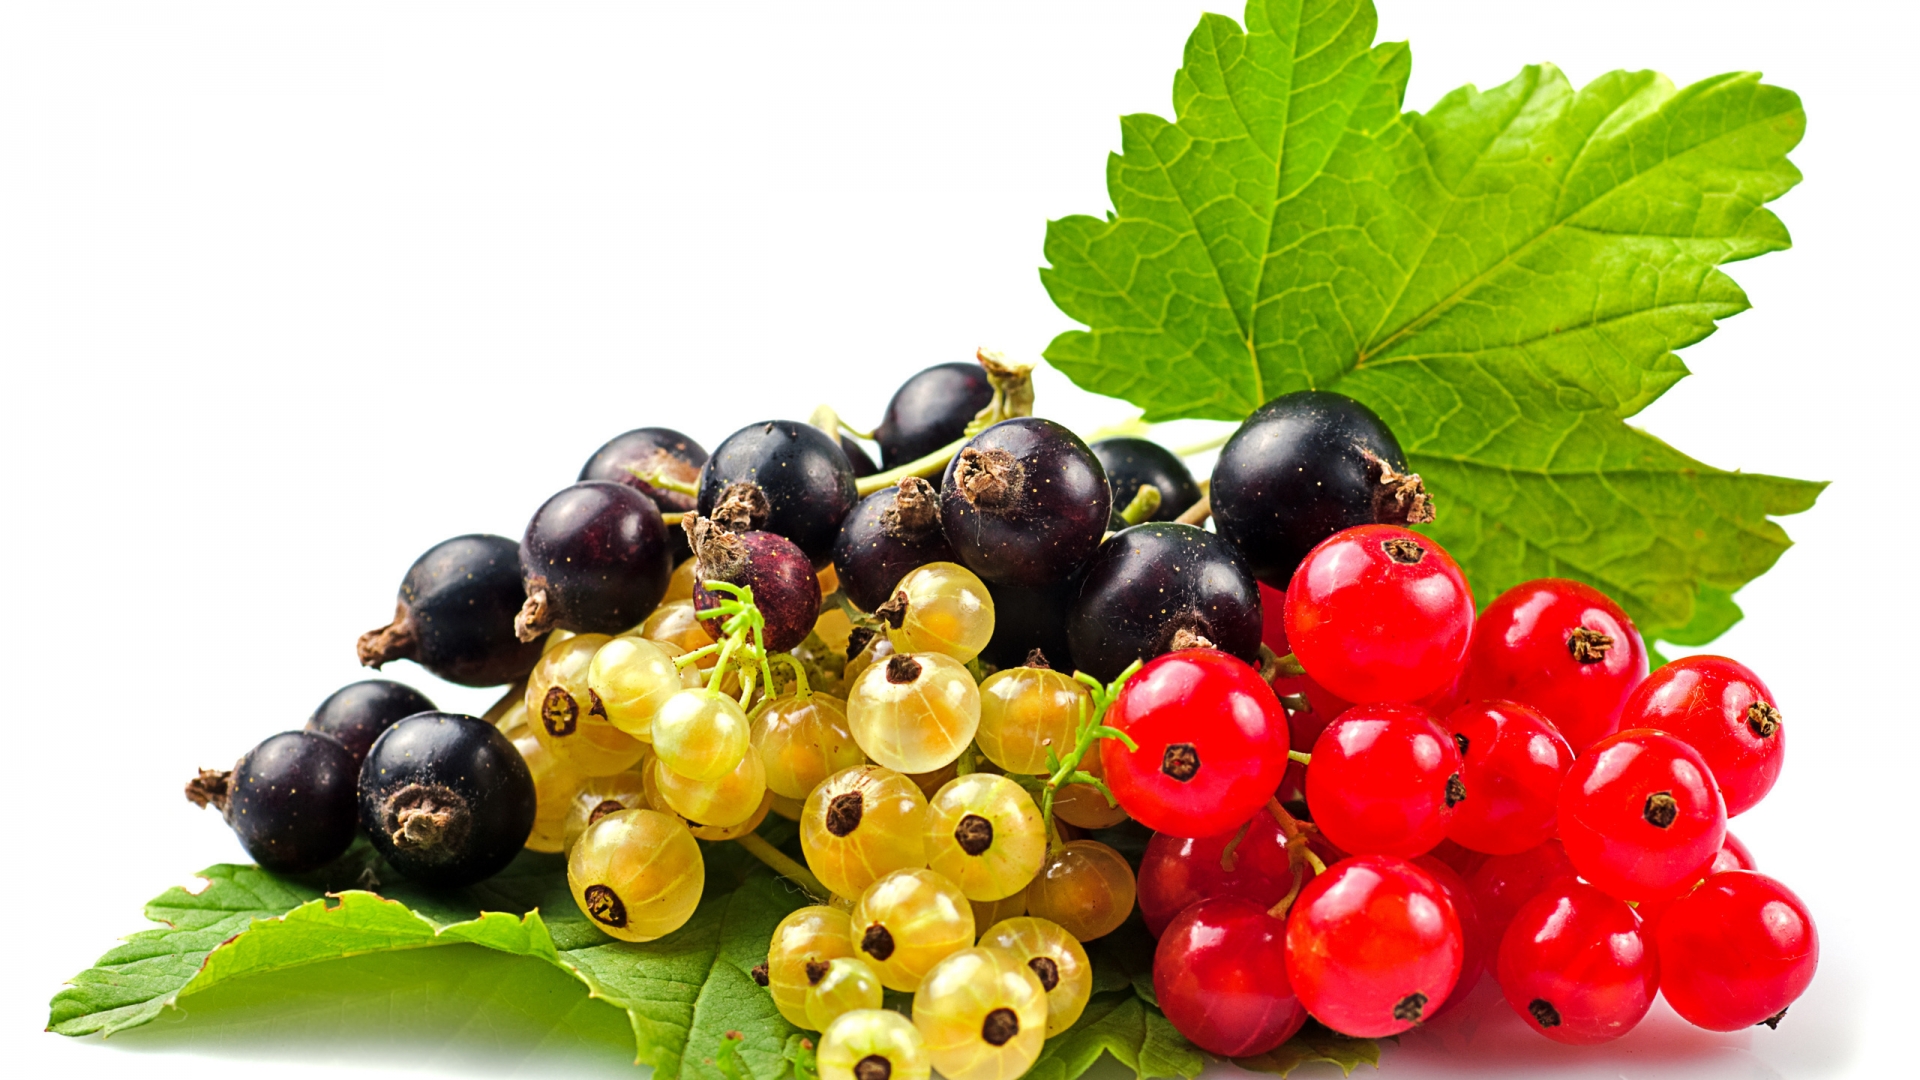 Currants Selection for 1920 x 1080 HDTV 1080p resolution